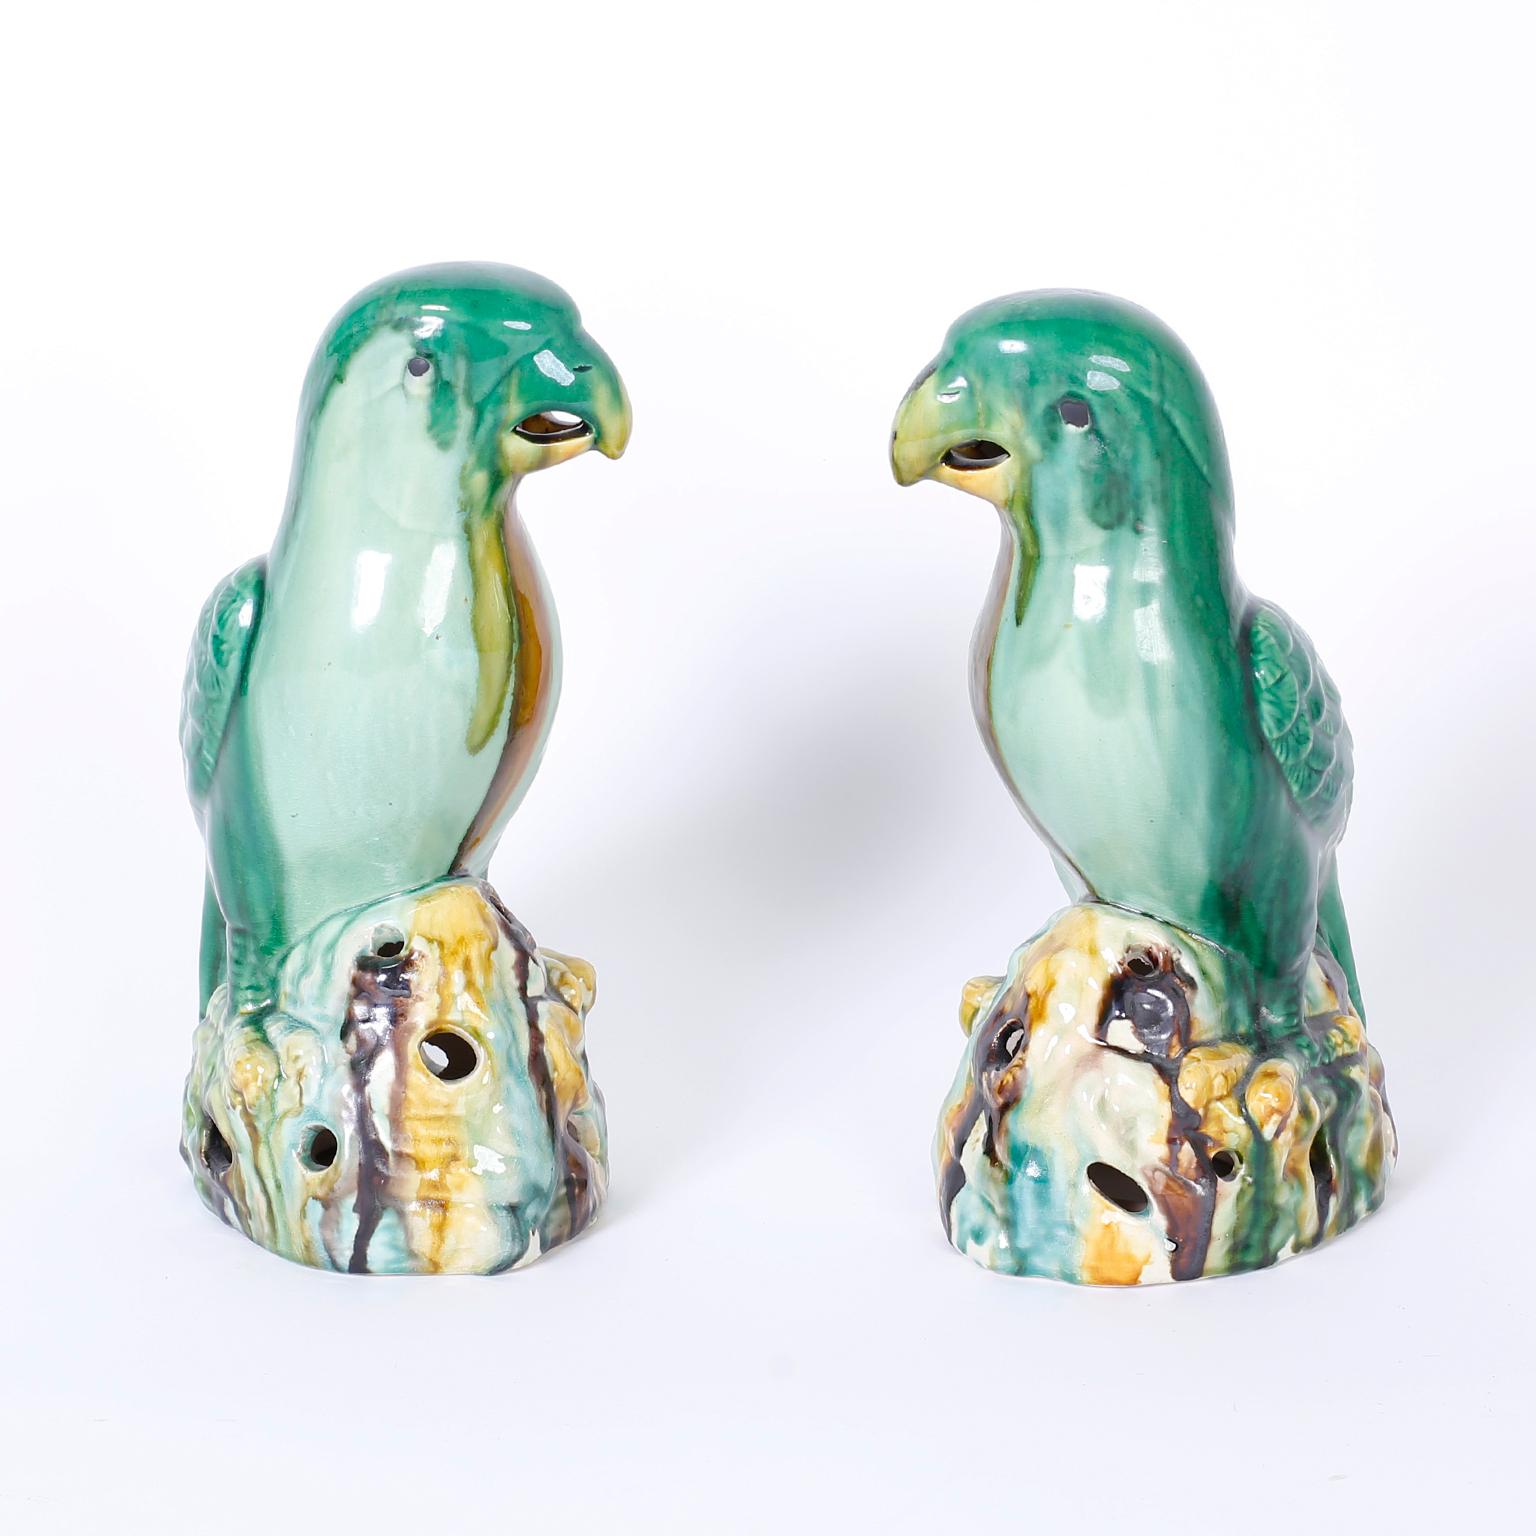 Intriguing pair of Chinese earthen ware birds or parrots glazed with greens, browns and creamy whites. The Sancai colors and glazing or slip technique is associated with the Tang dynasty and is well represented here.